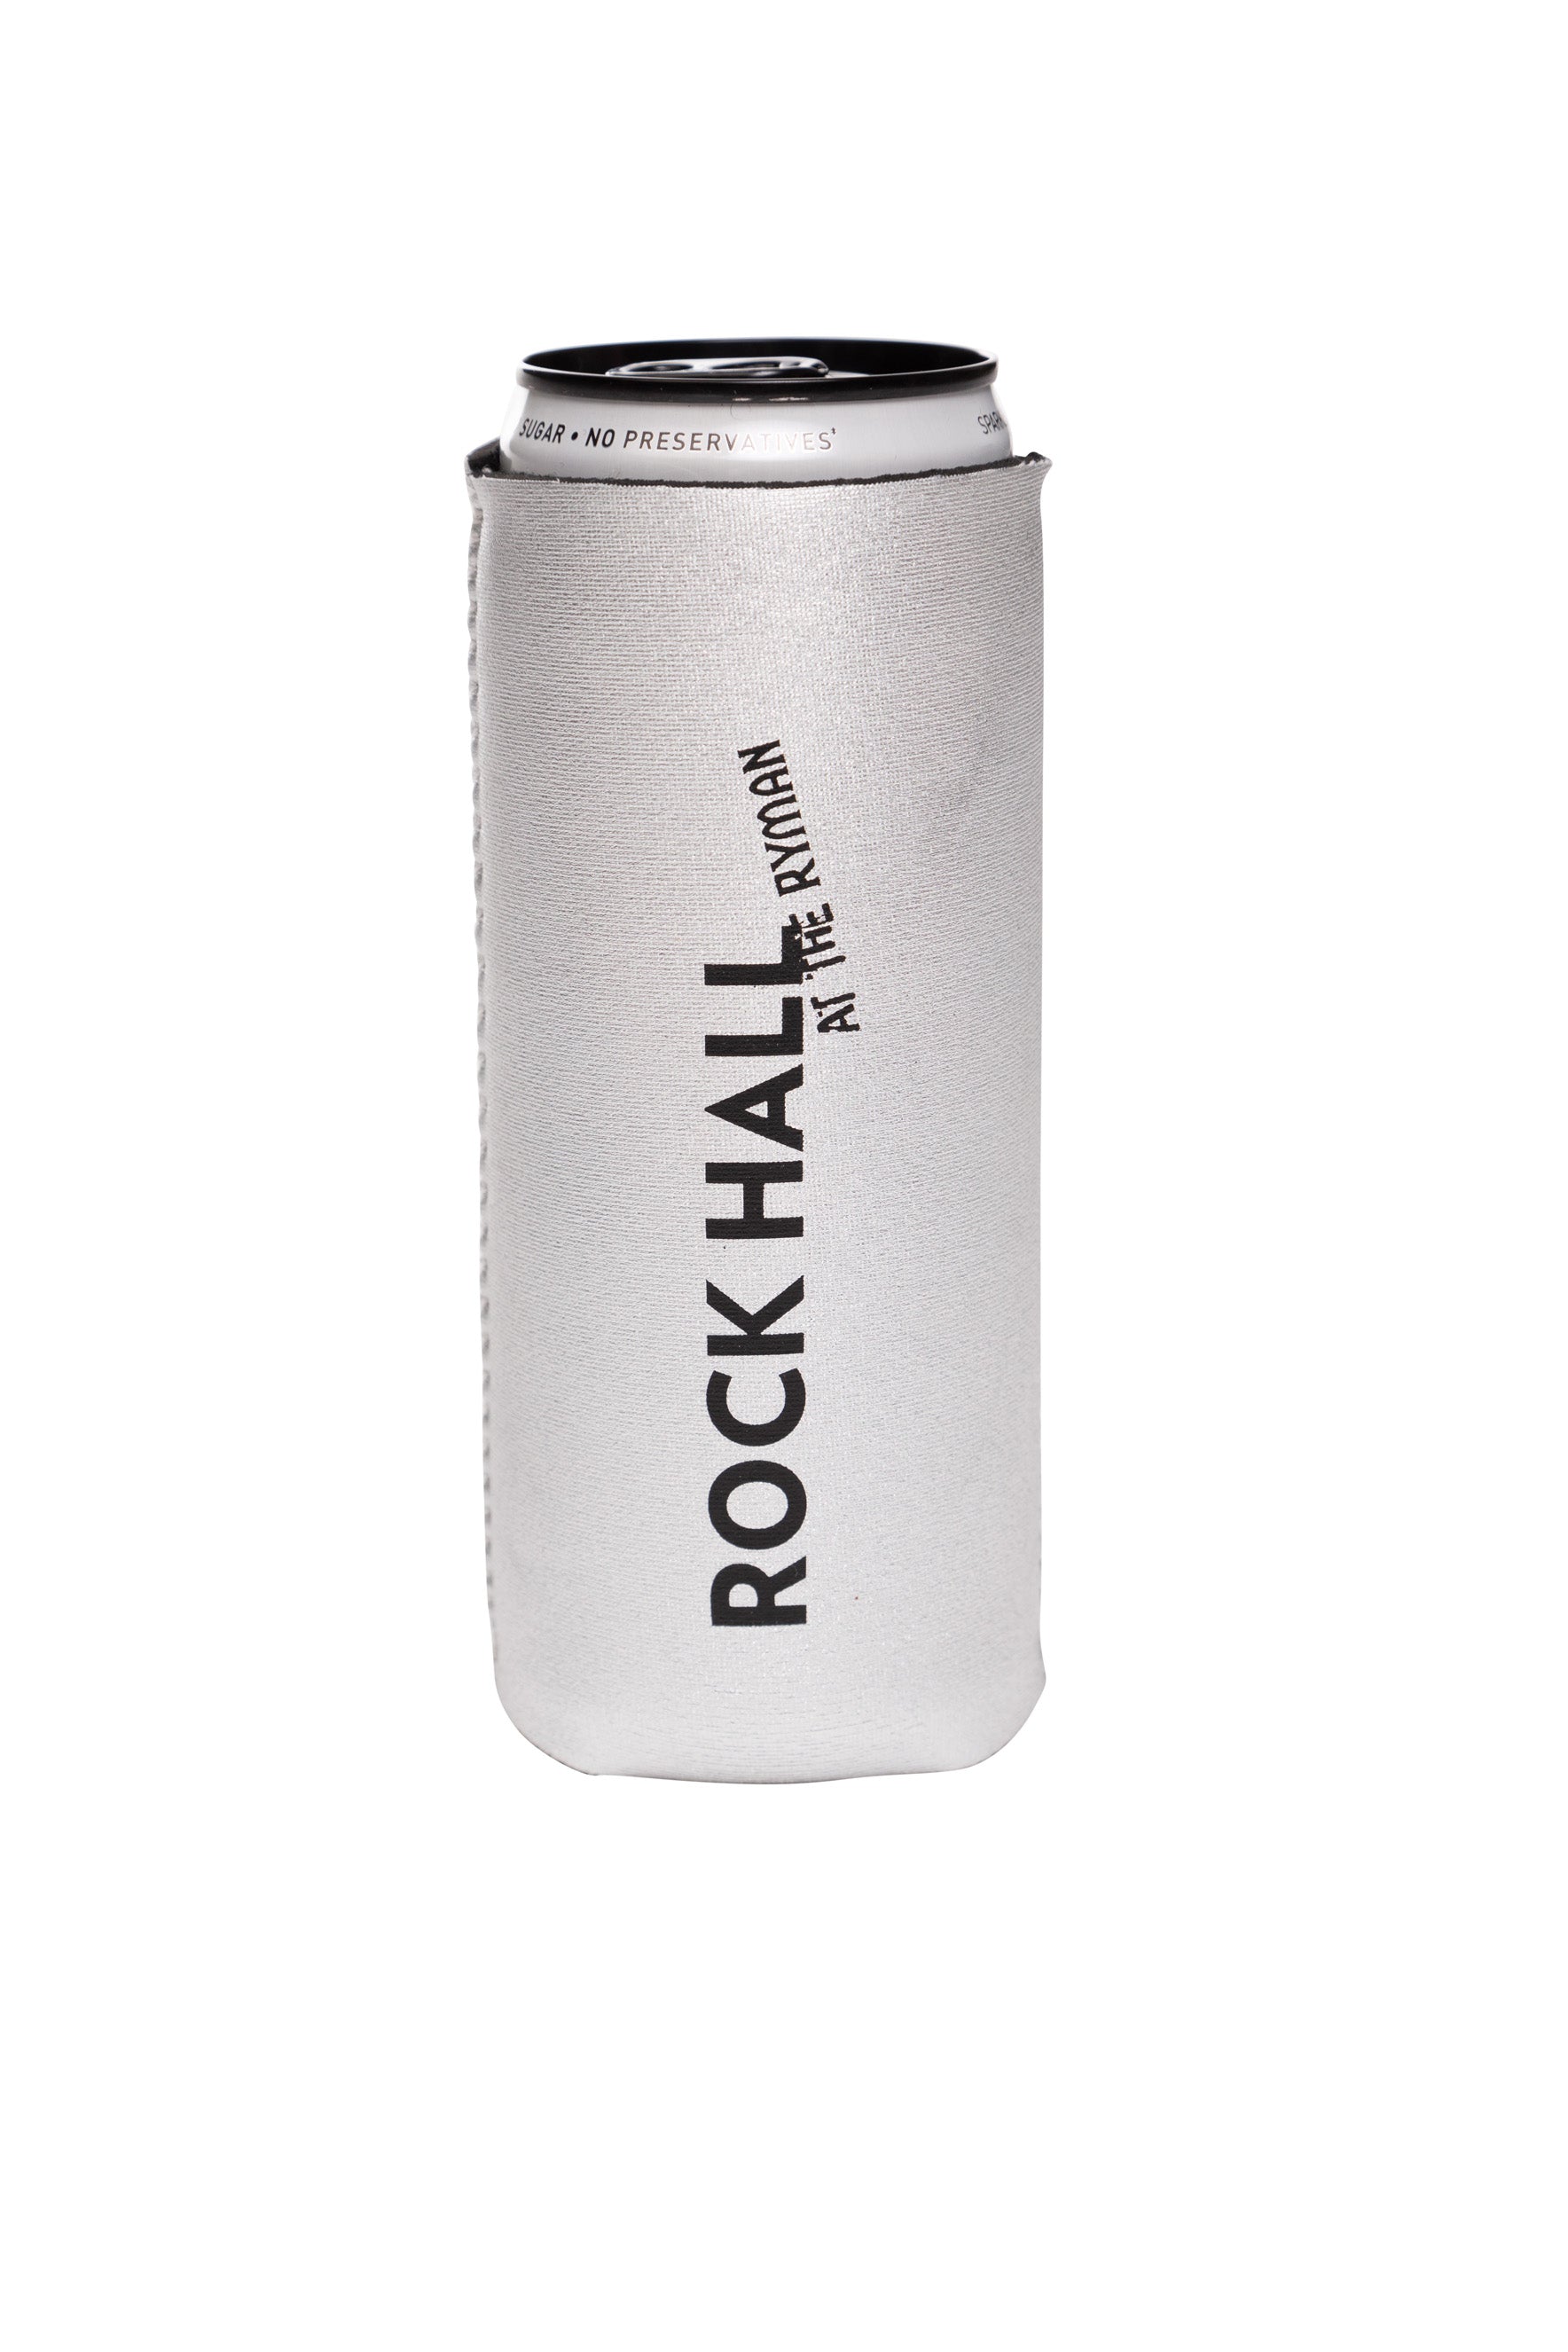 Rock Hall at The Ryman Slim Can Koozie in Silver